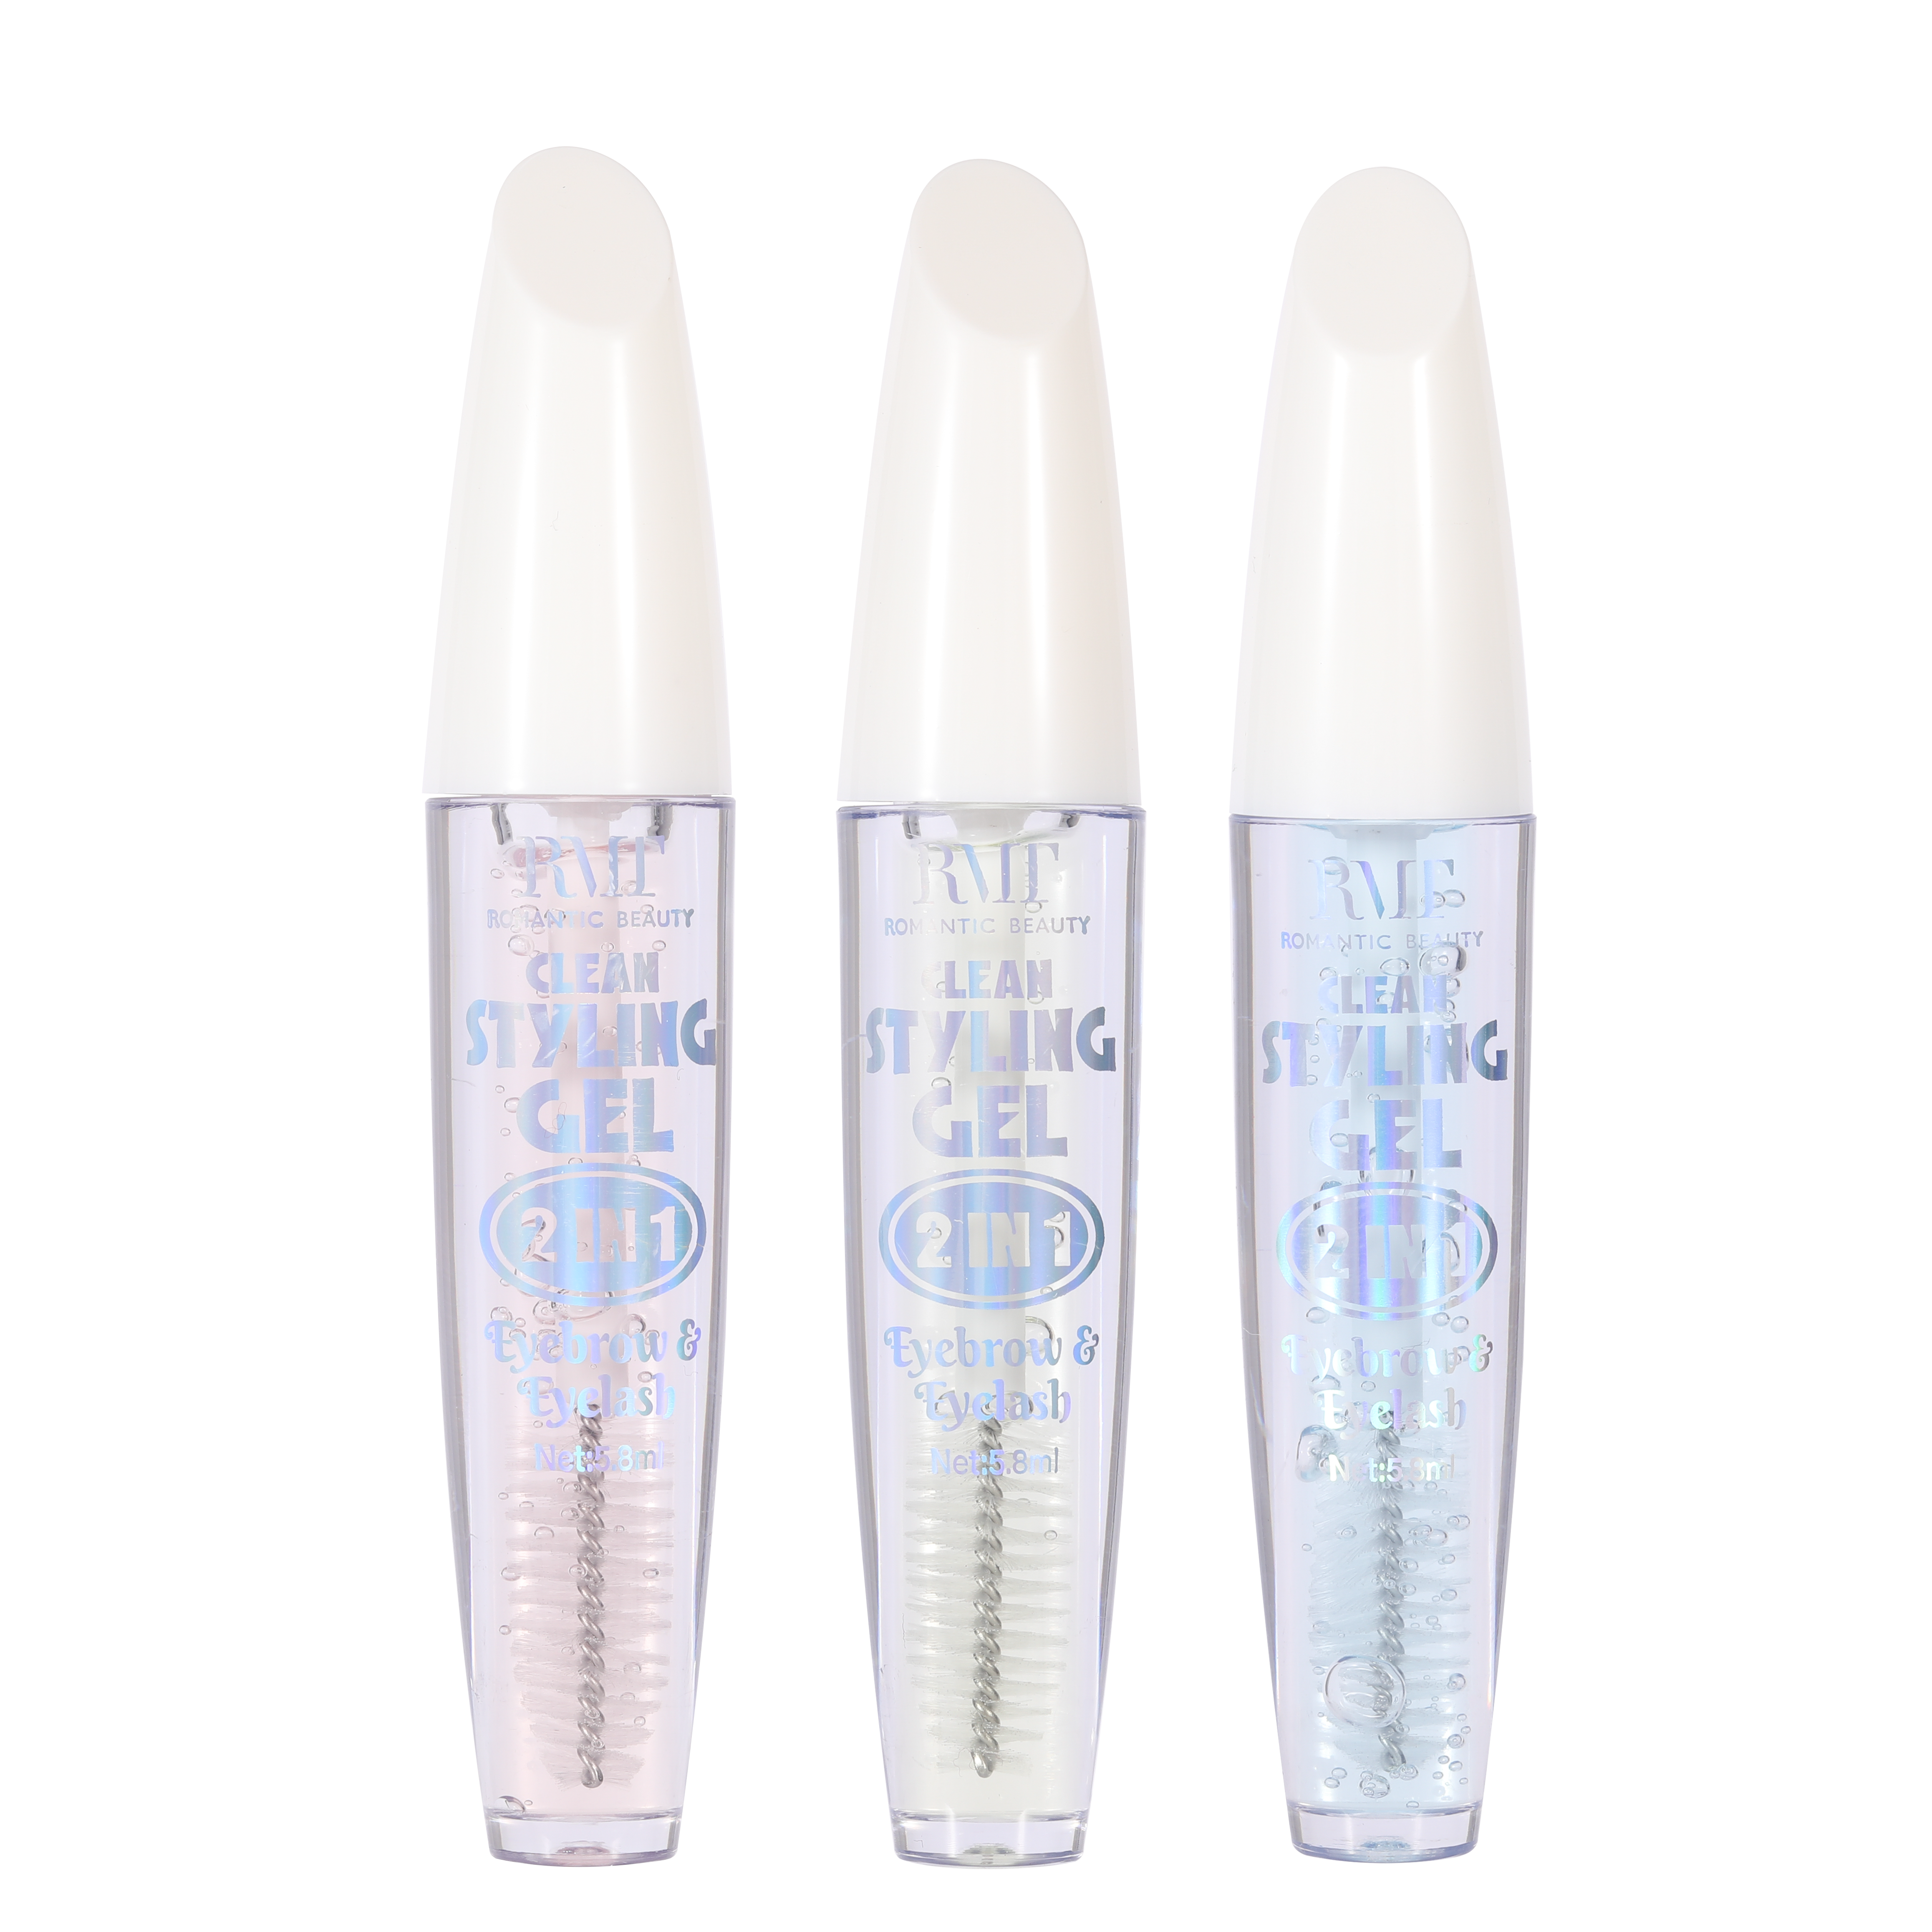 Clean Styling Gel 2-in-1 (Brow and Lash)